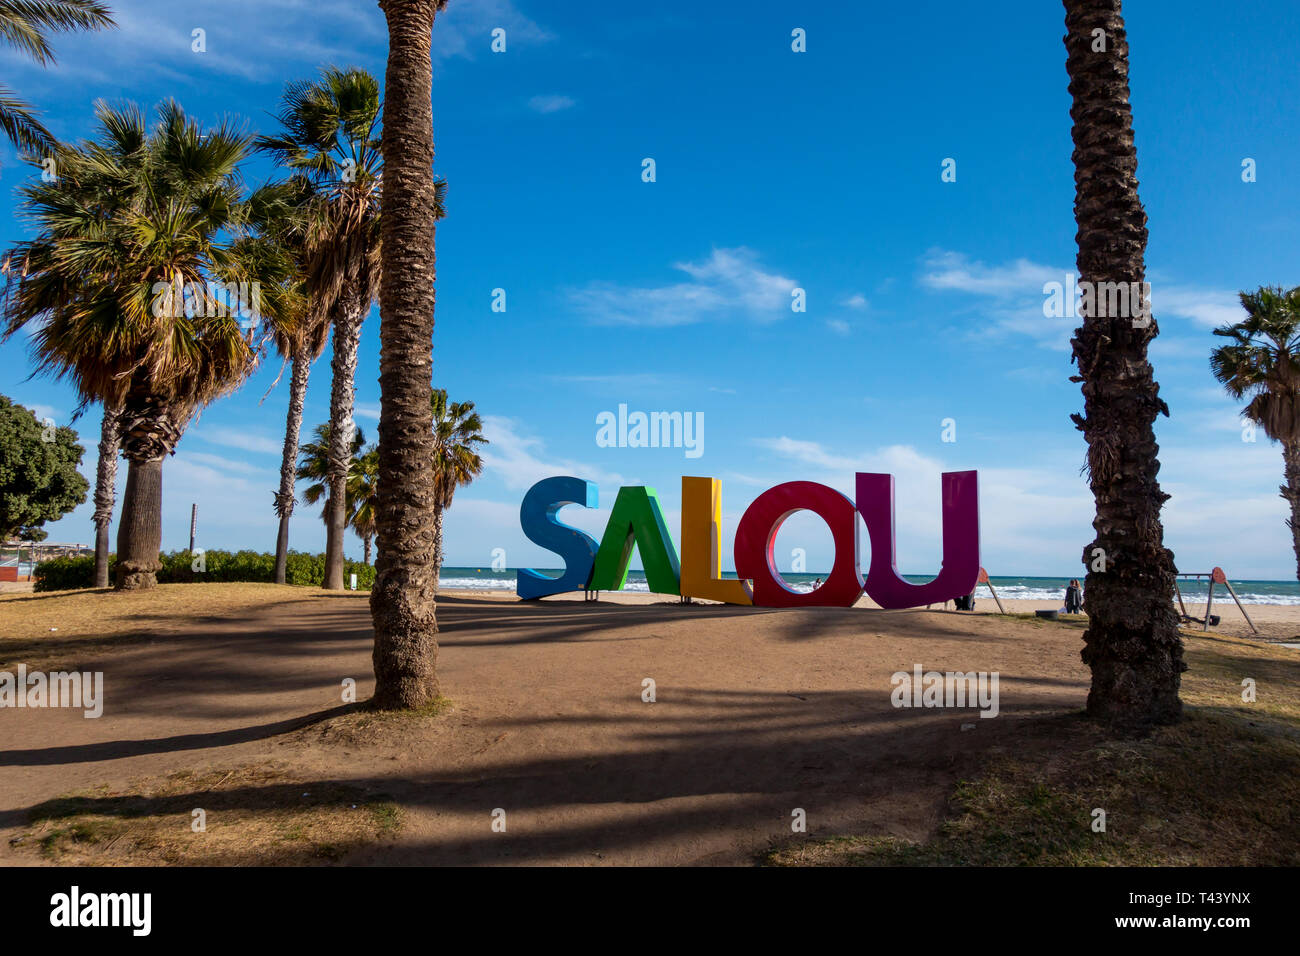 Colorful text in Llevant beach in Salou, a major tourist destination at summer, in the Catalan Costa Dorada Stock Photo